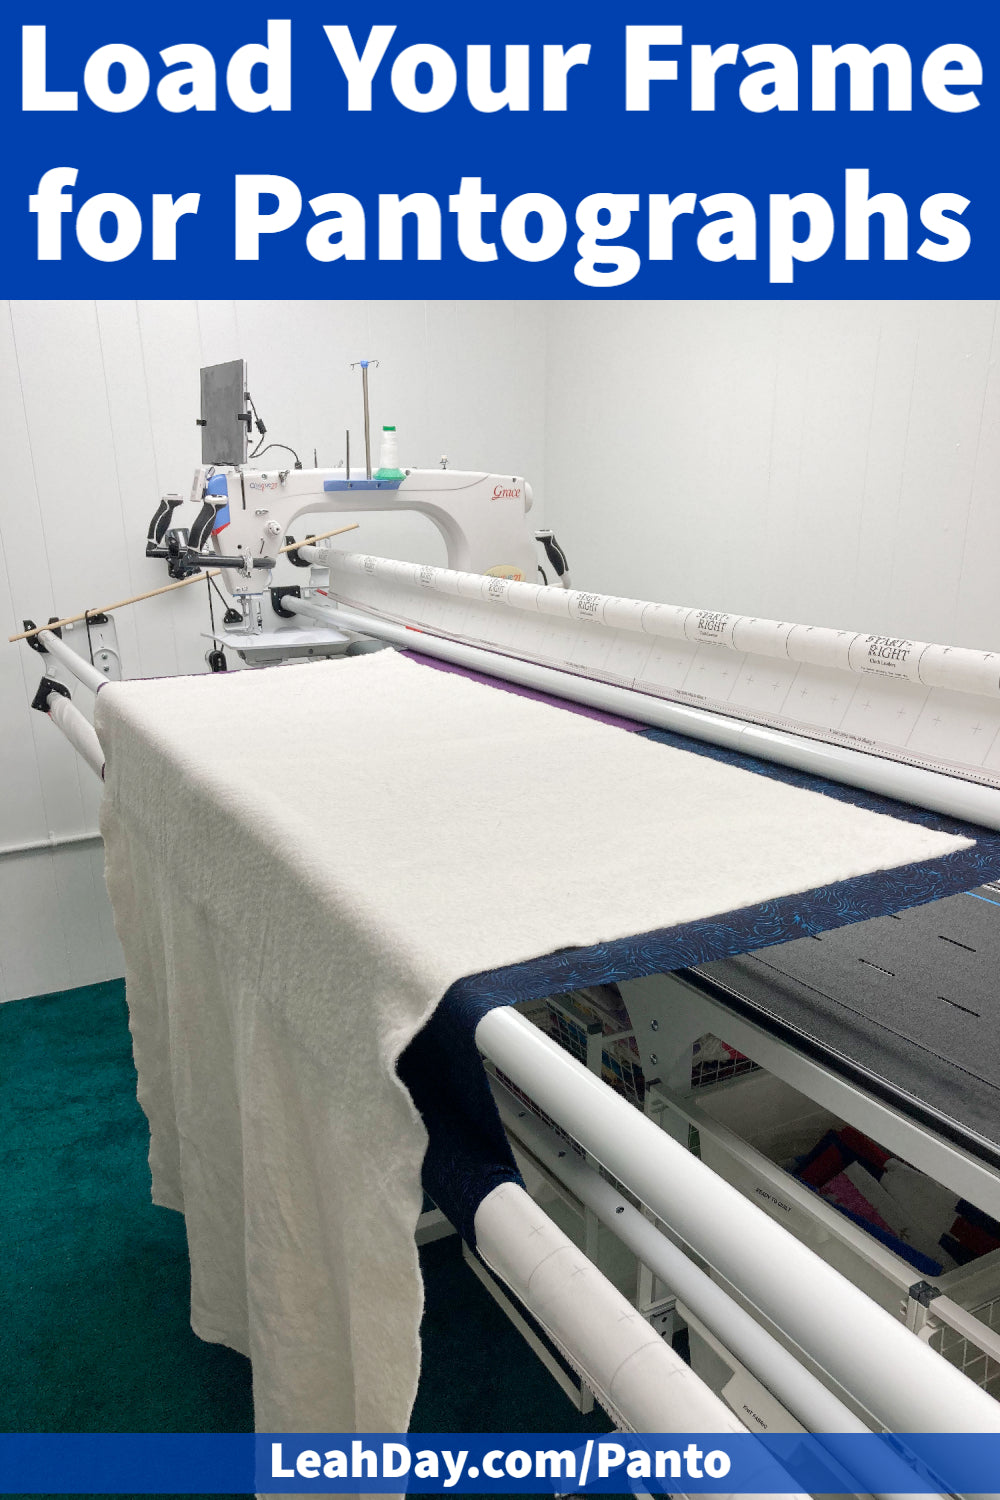 How To Use Red Snappers On A Longarm Quilting Frame